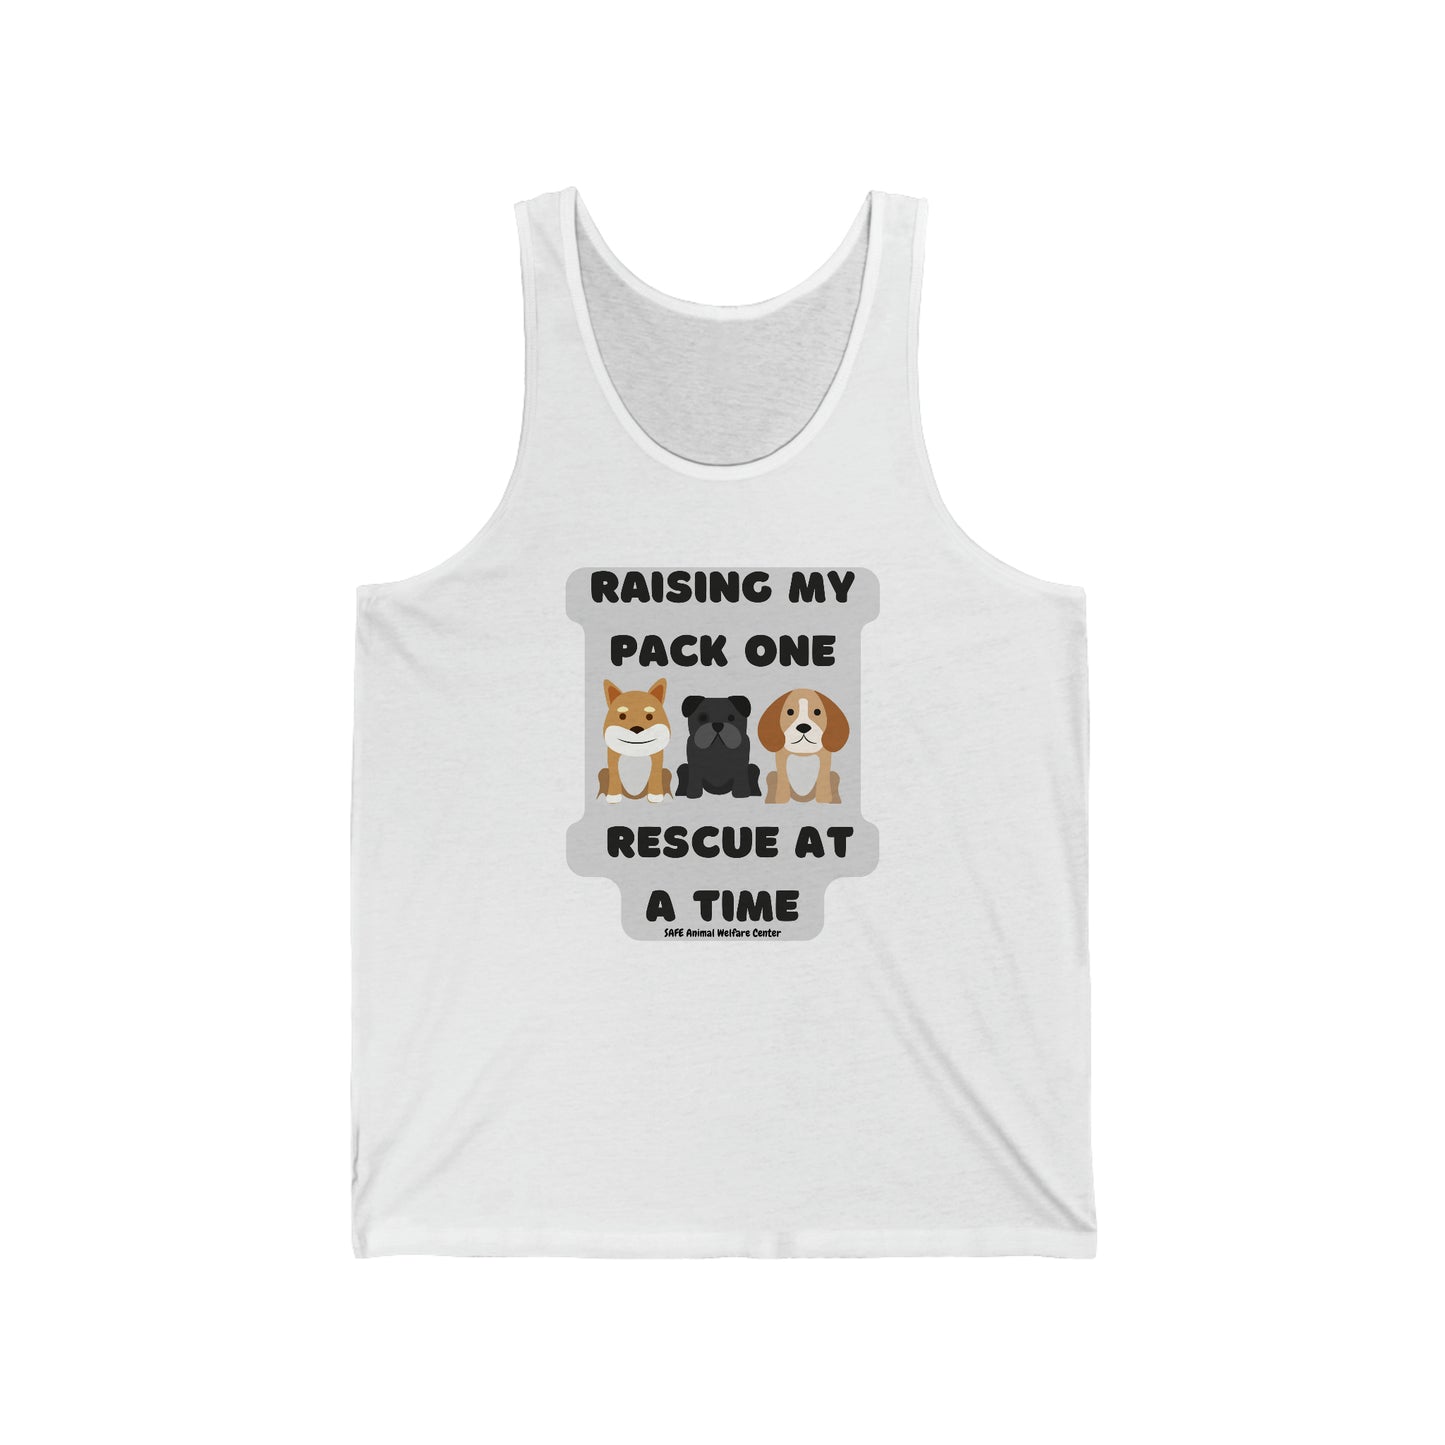 One Rescue At A Time Unisex Jersey Tank